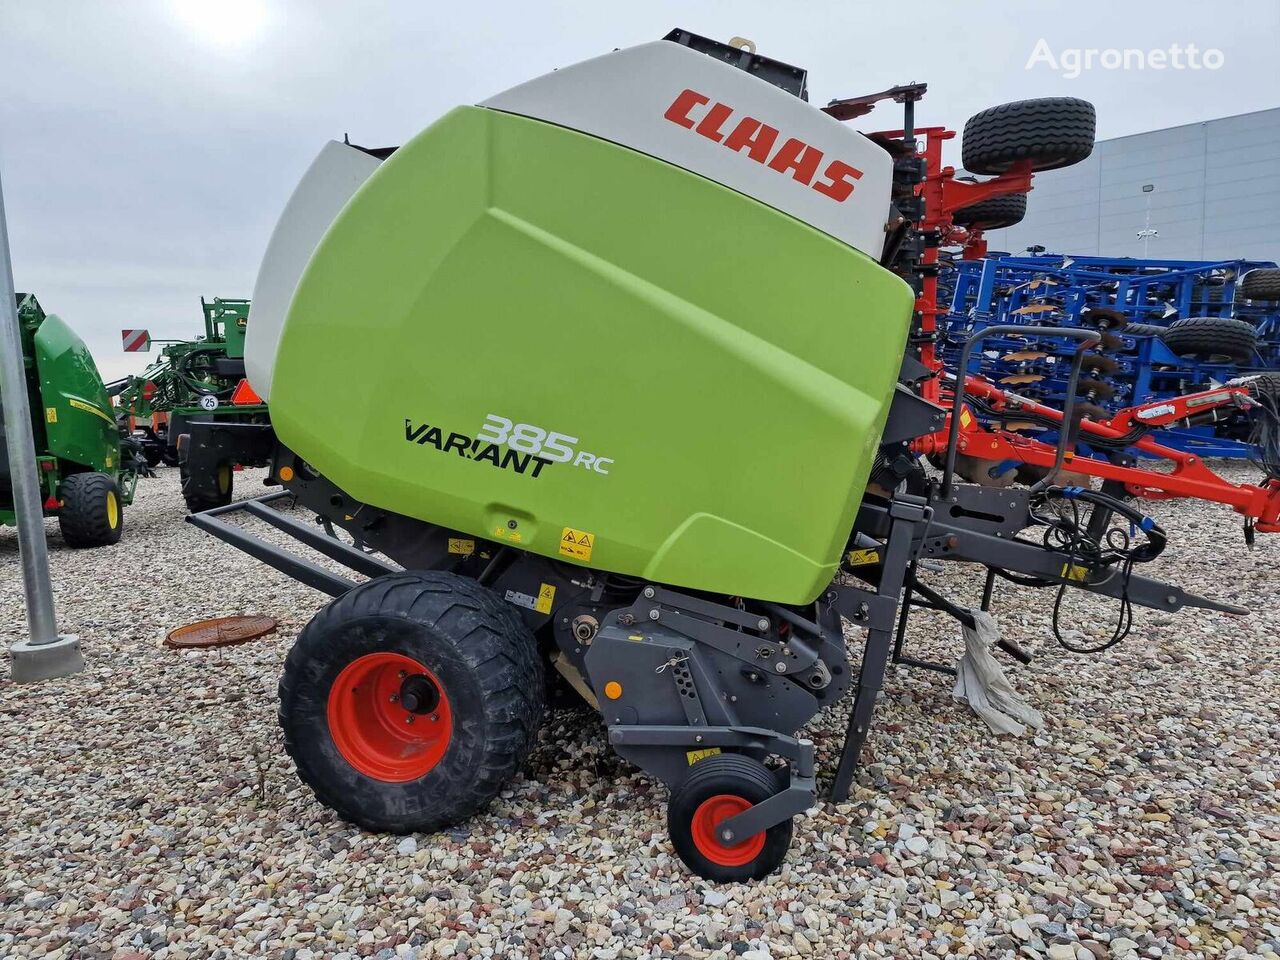 Claas 385 RC VARIANT square baler